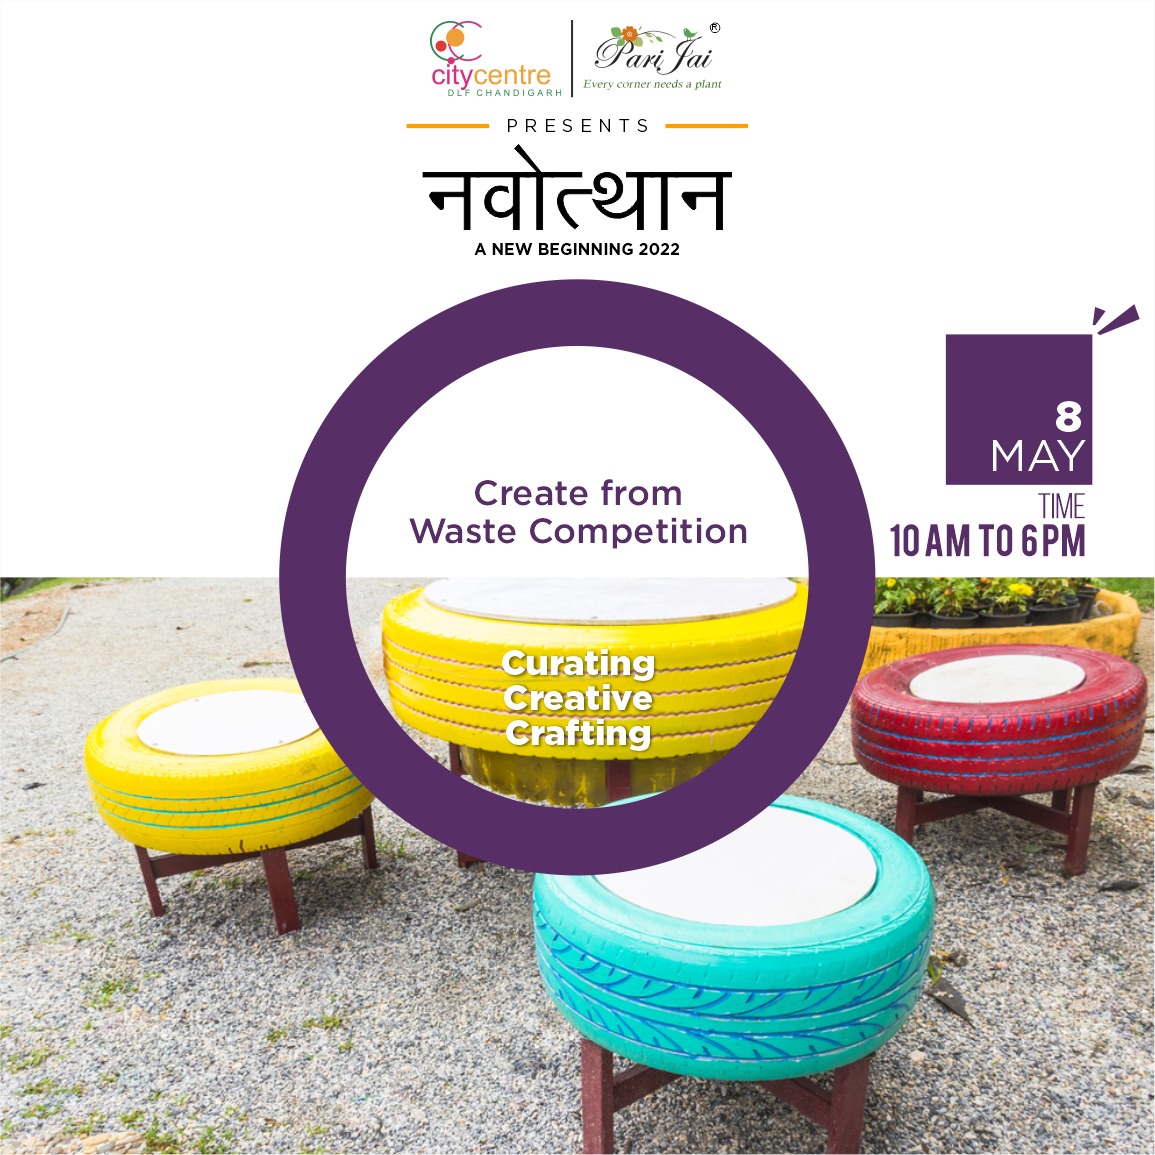 Curating #CreativeCrafting!!
@dlfcitycentre
 & 
@Parijaigenus1
 invite you to try out your #creativetalents in #CreatefromWaste #Competition at #Navotthan from 10 AM to 6 PM on 8th April 2022.
#Register Now bit.ly/3xZziiP
#MotherDayCelebration #TrashArt #TrashToTreasure